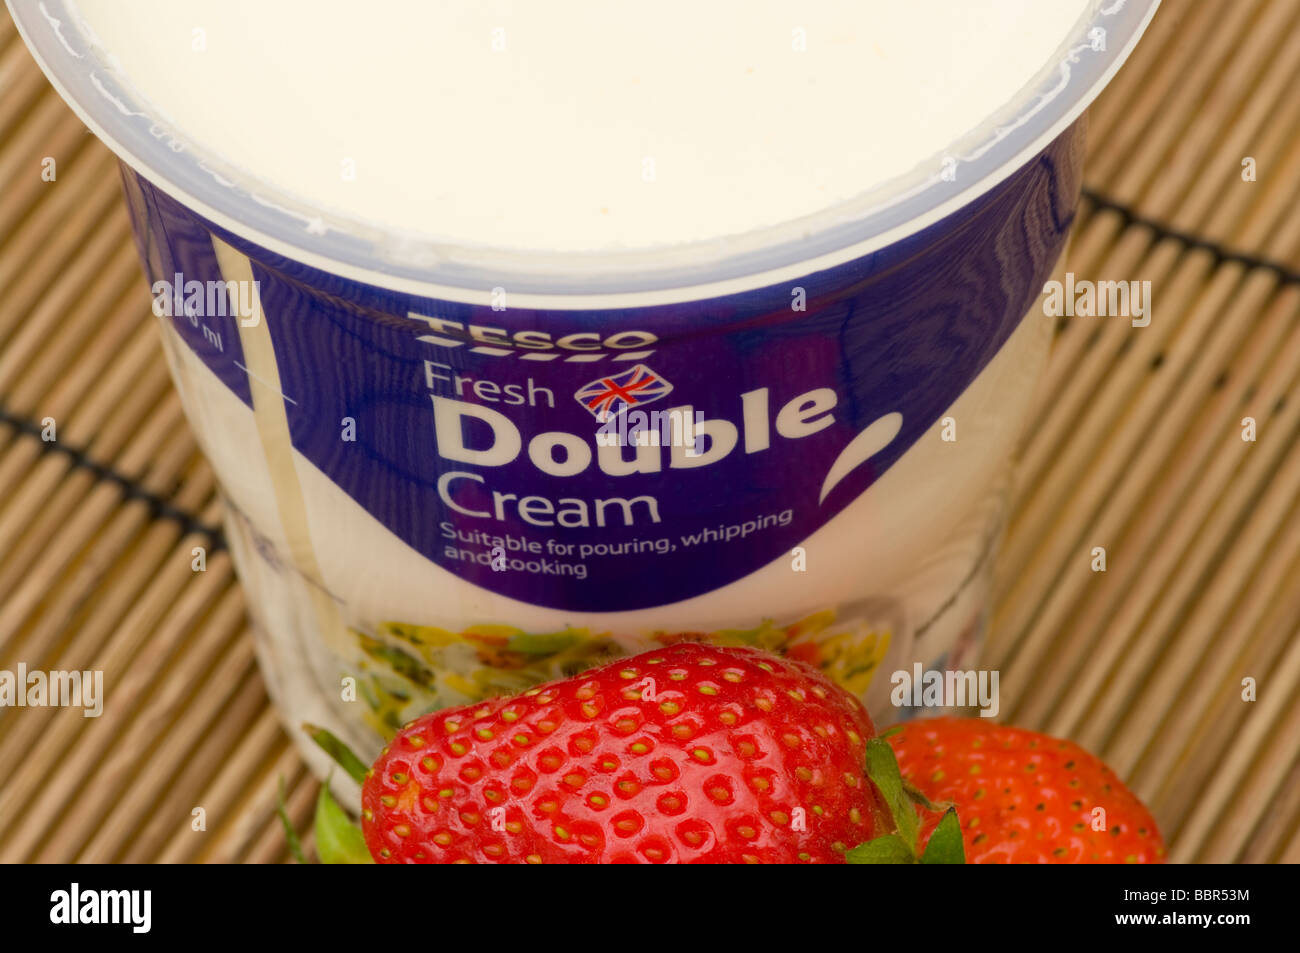 Fresh Strawberries With a Pot Of Fresh Double Cream Stock Photo - Alamy